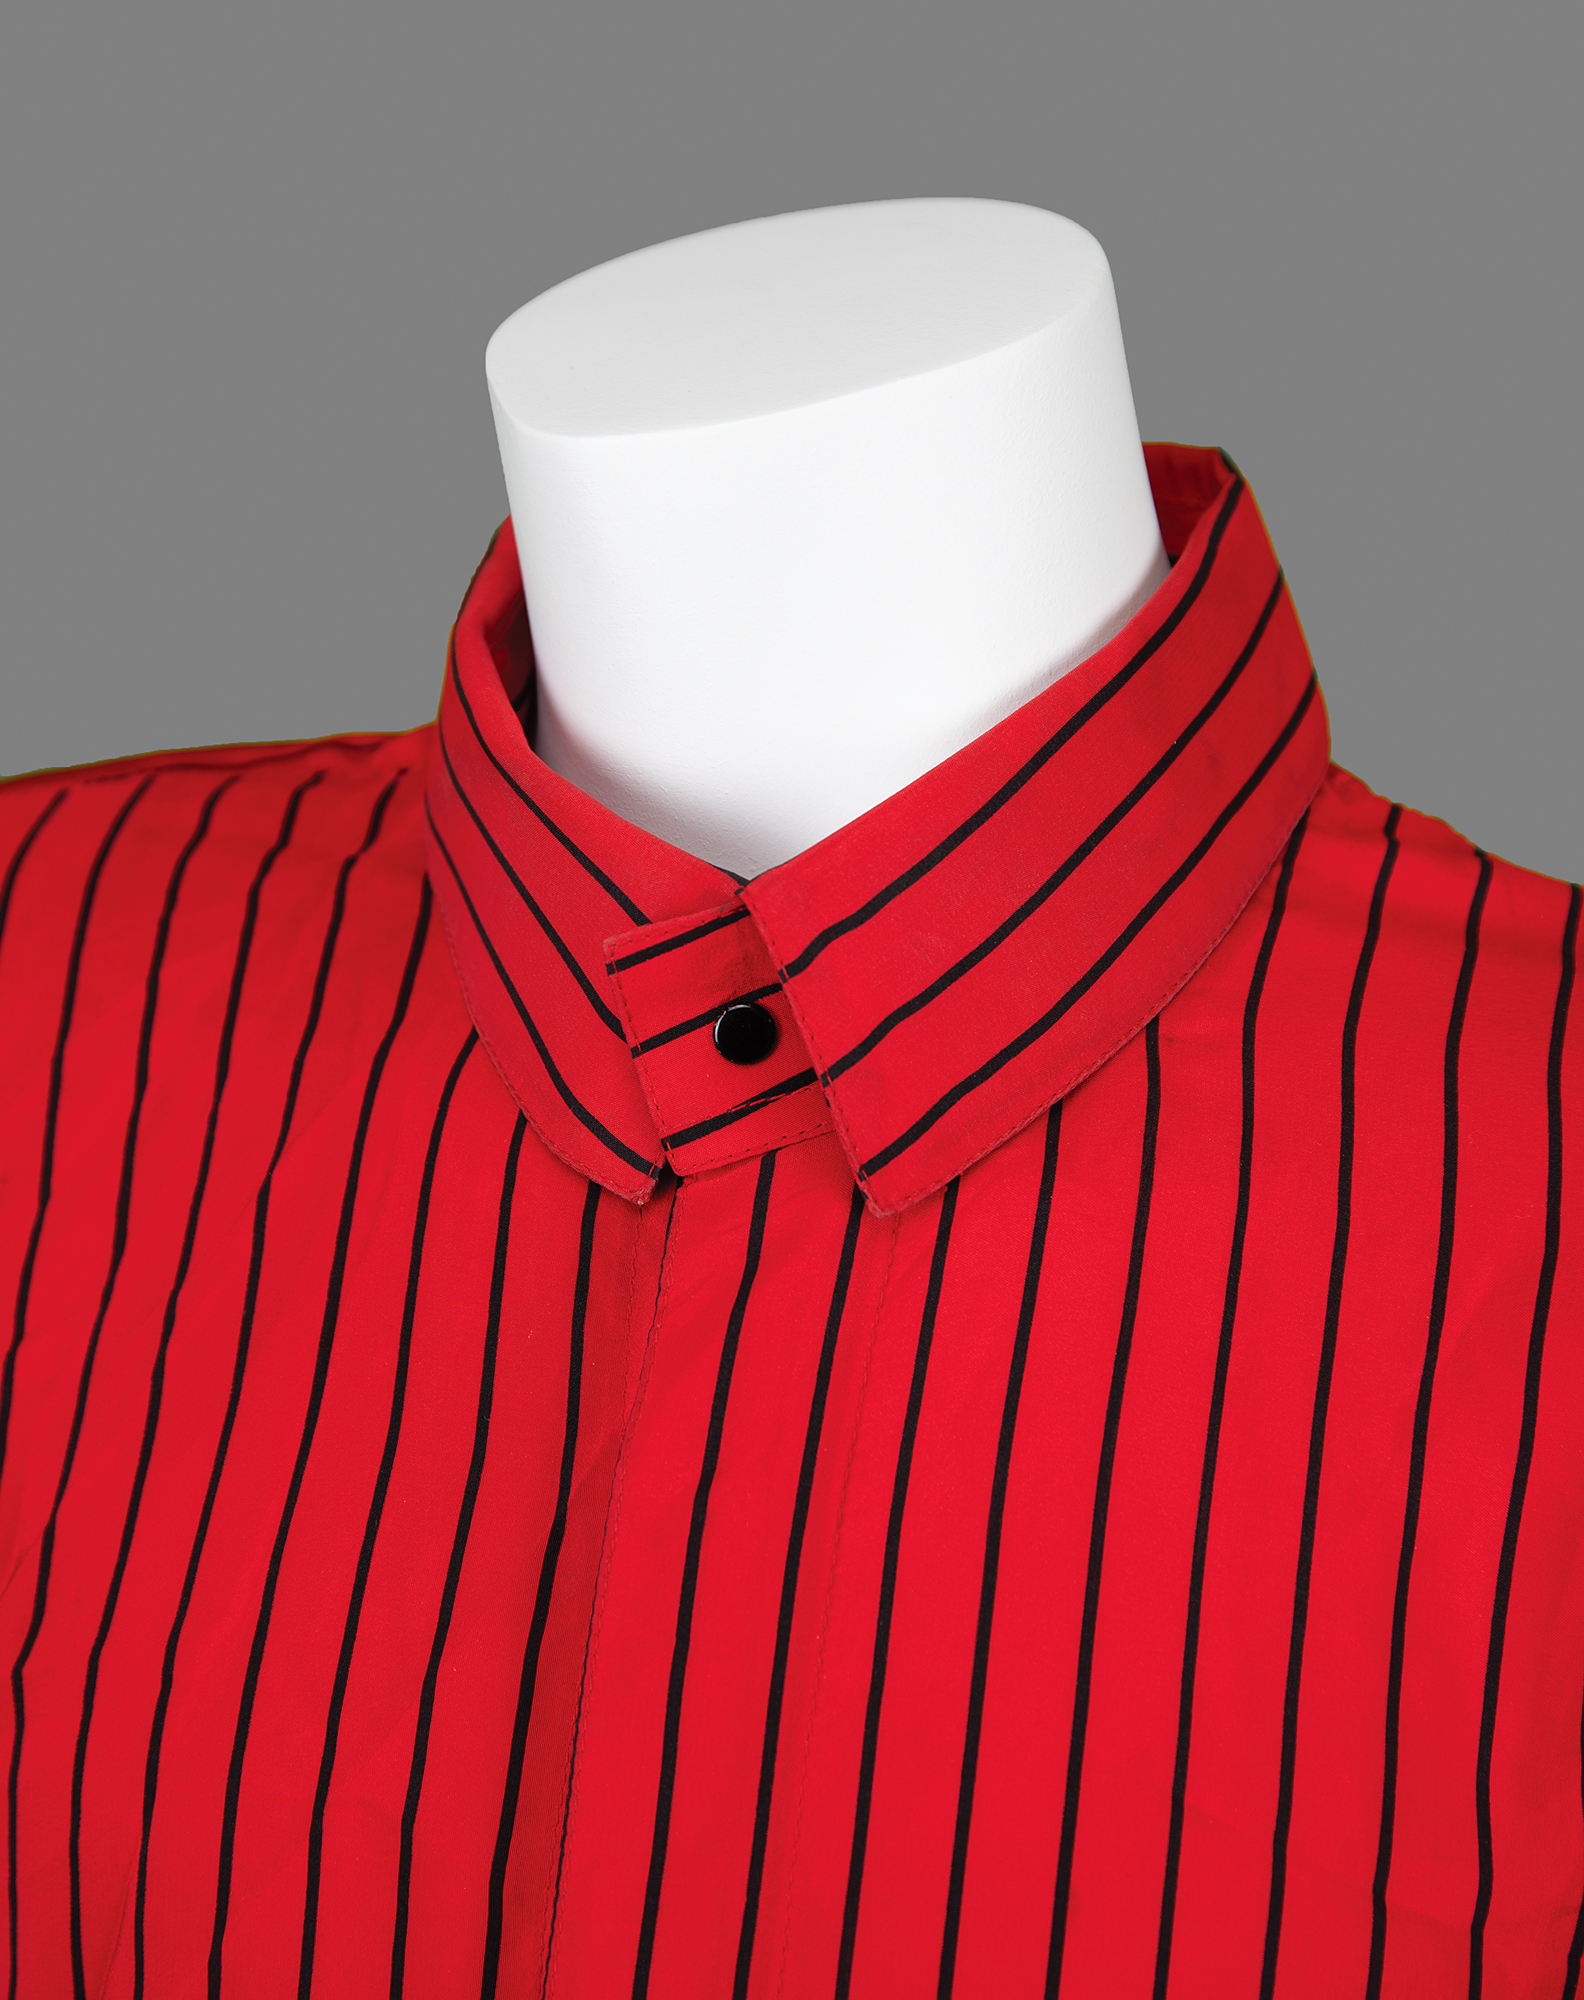 Prince's Custom-Made Red Striped Shirt with 